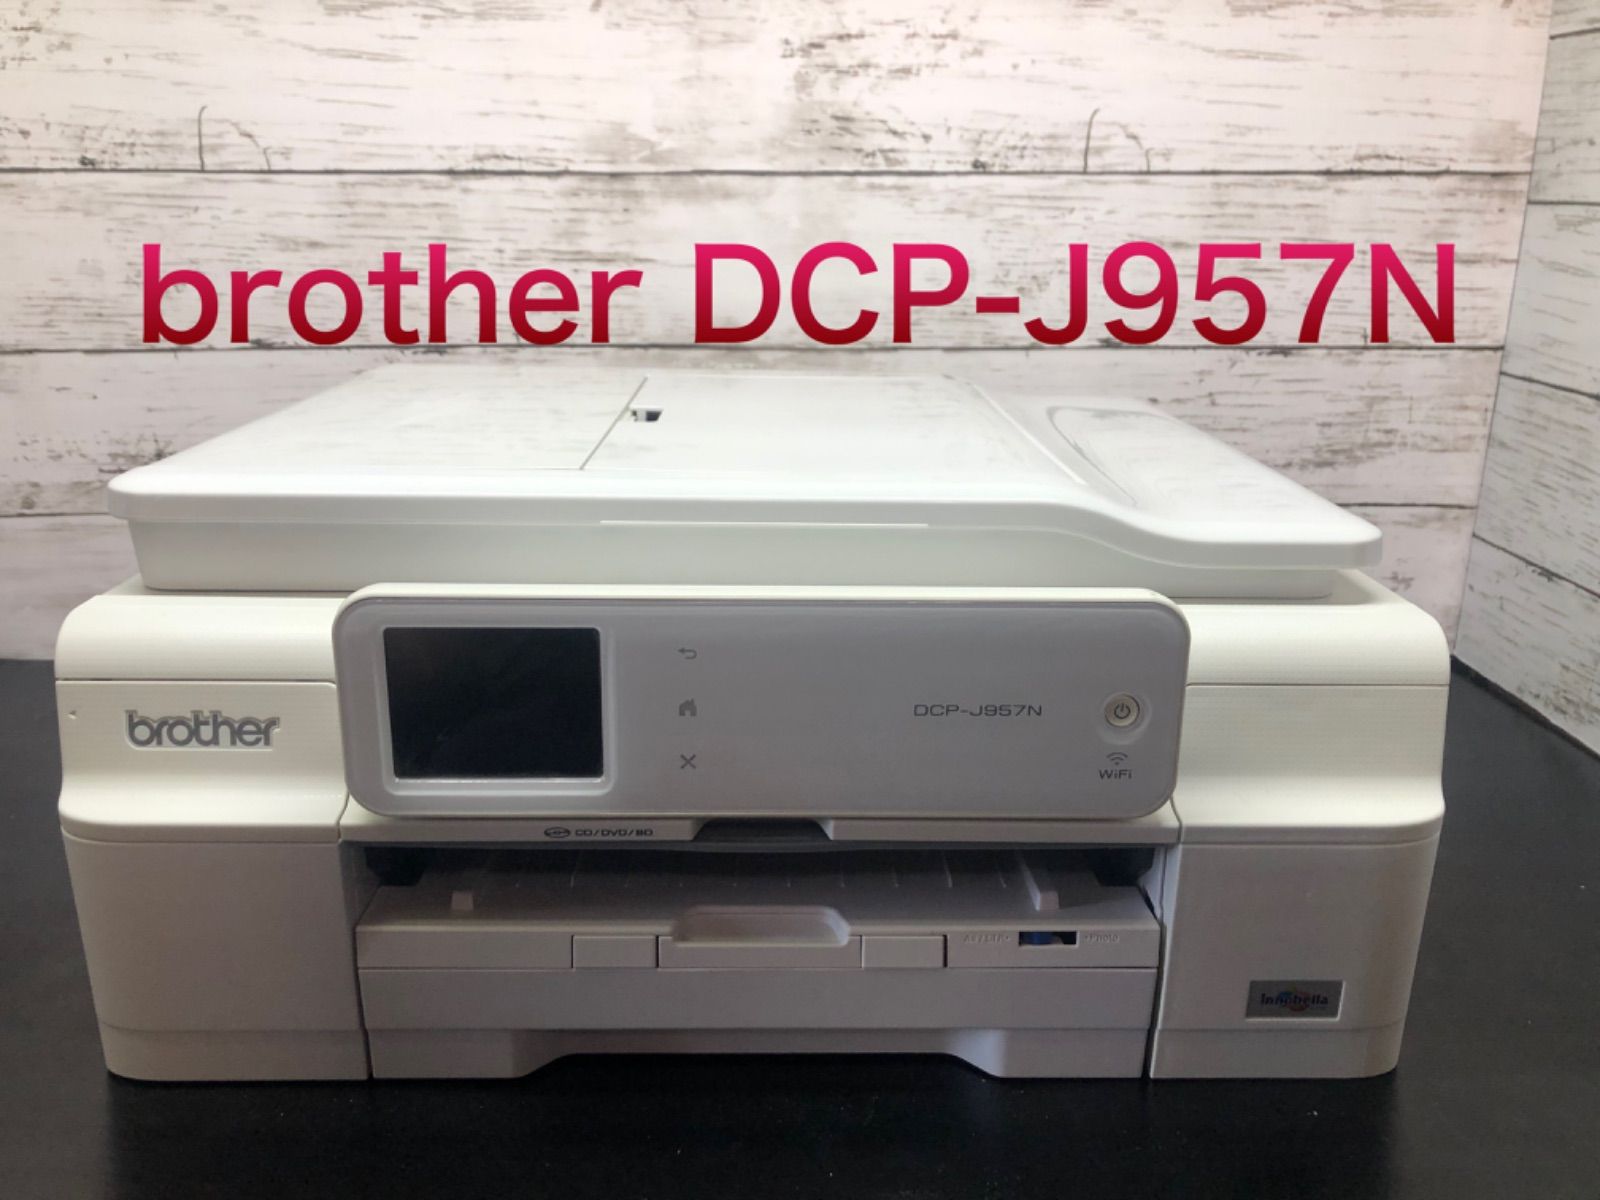 brother DCP-J957N-Wbrother